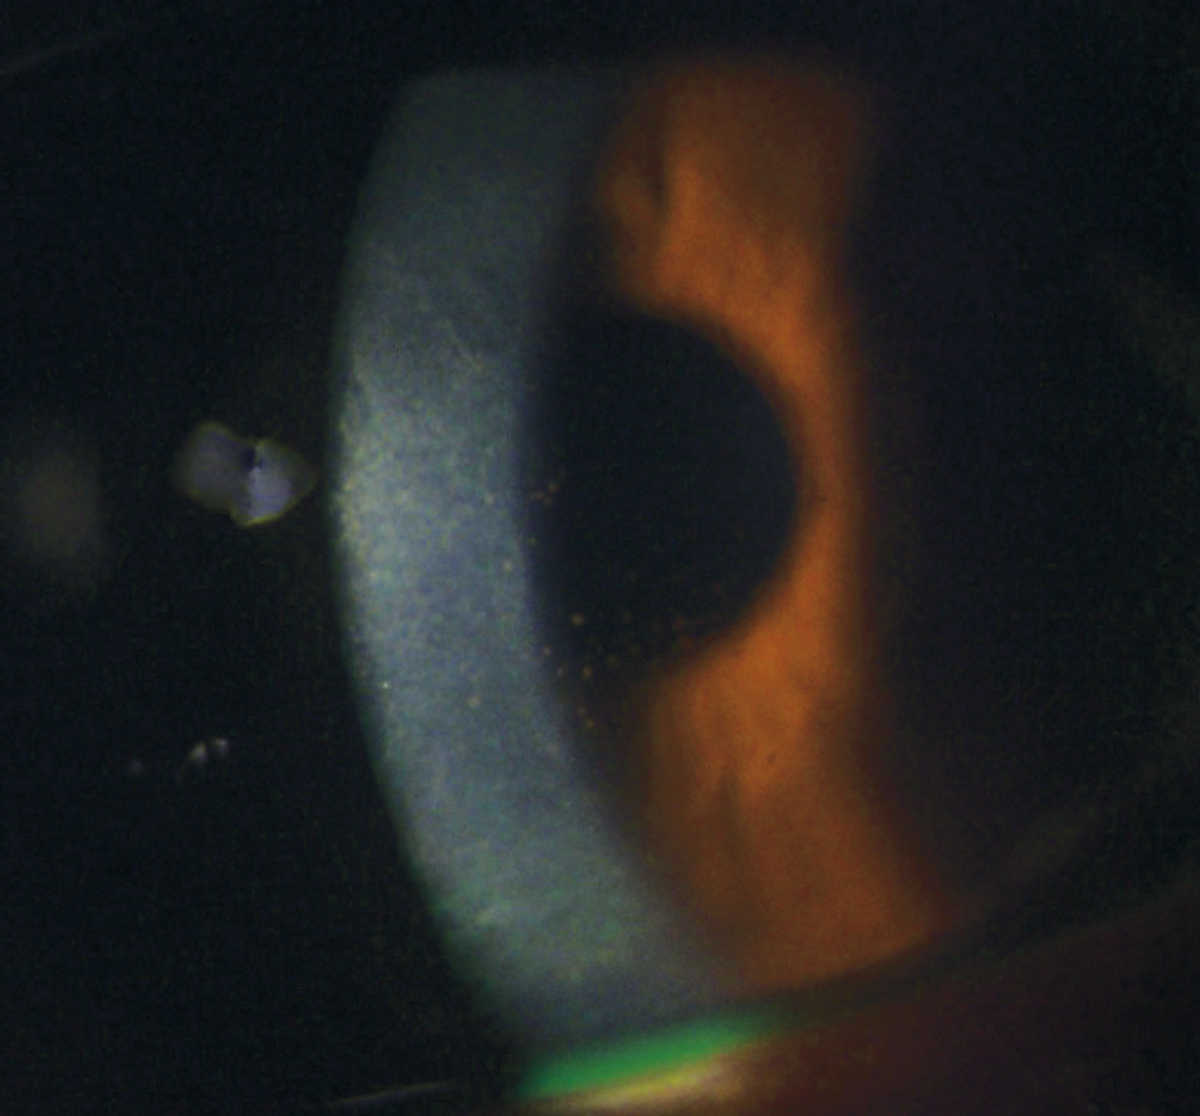 HSV endothelial keratitis is unique because it can occur with or without prior HSVK clinical manifestation. 